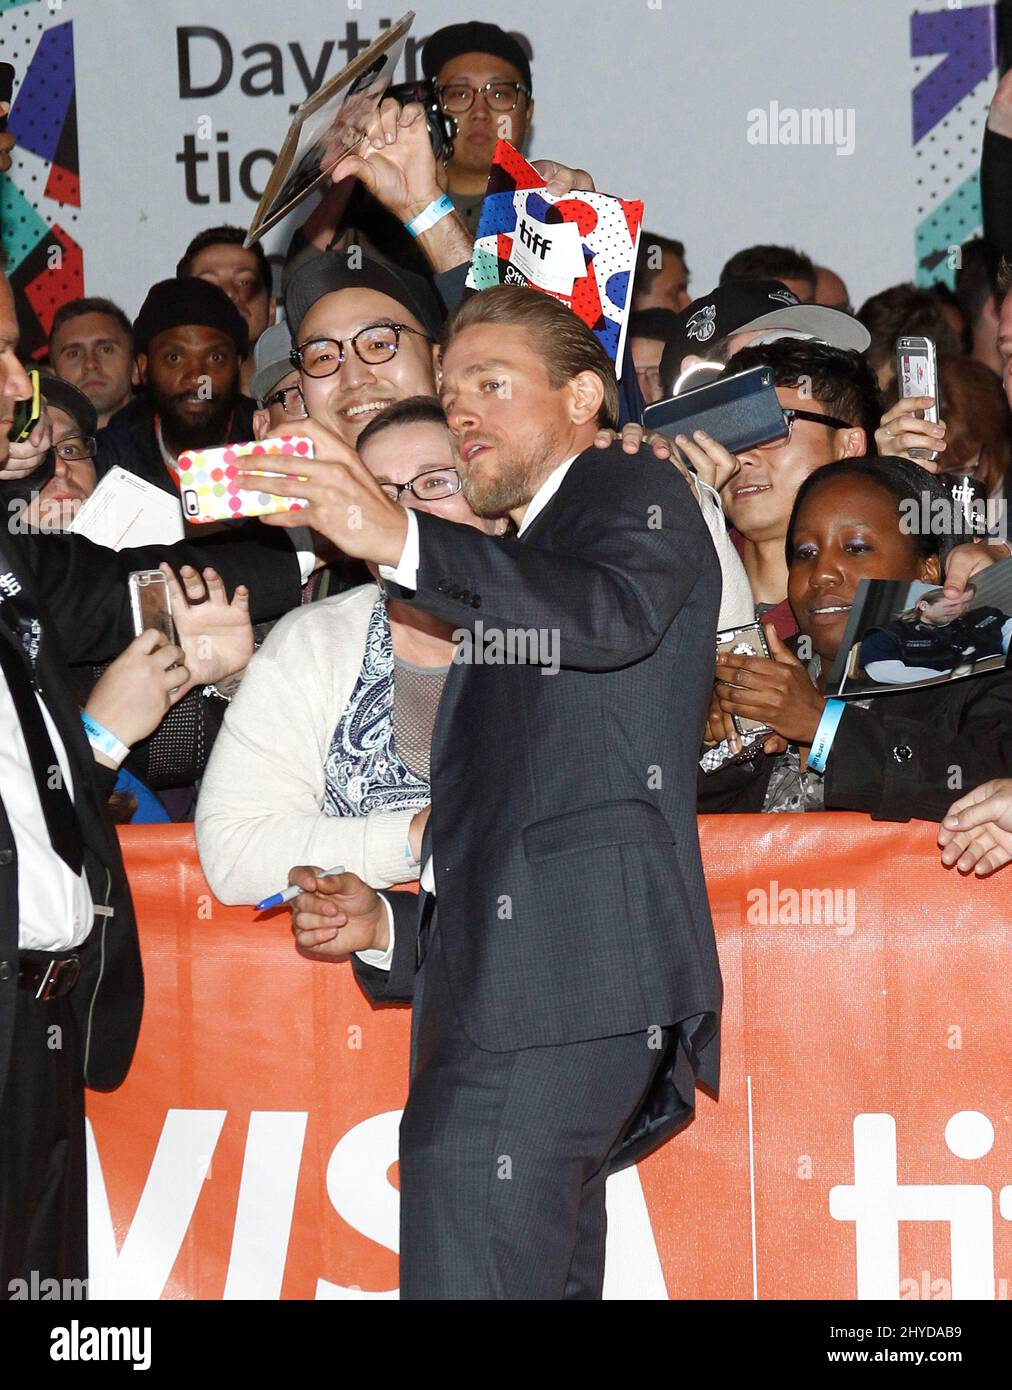 Charlie Hunnam arriving at the 'Papillon' premiere at the 2017 Toronto International Film Festival held at the Princess of Wales Theatre Stock Photo